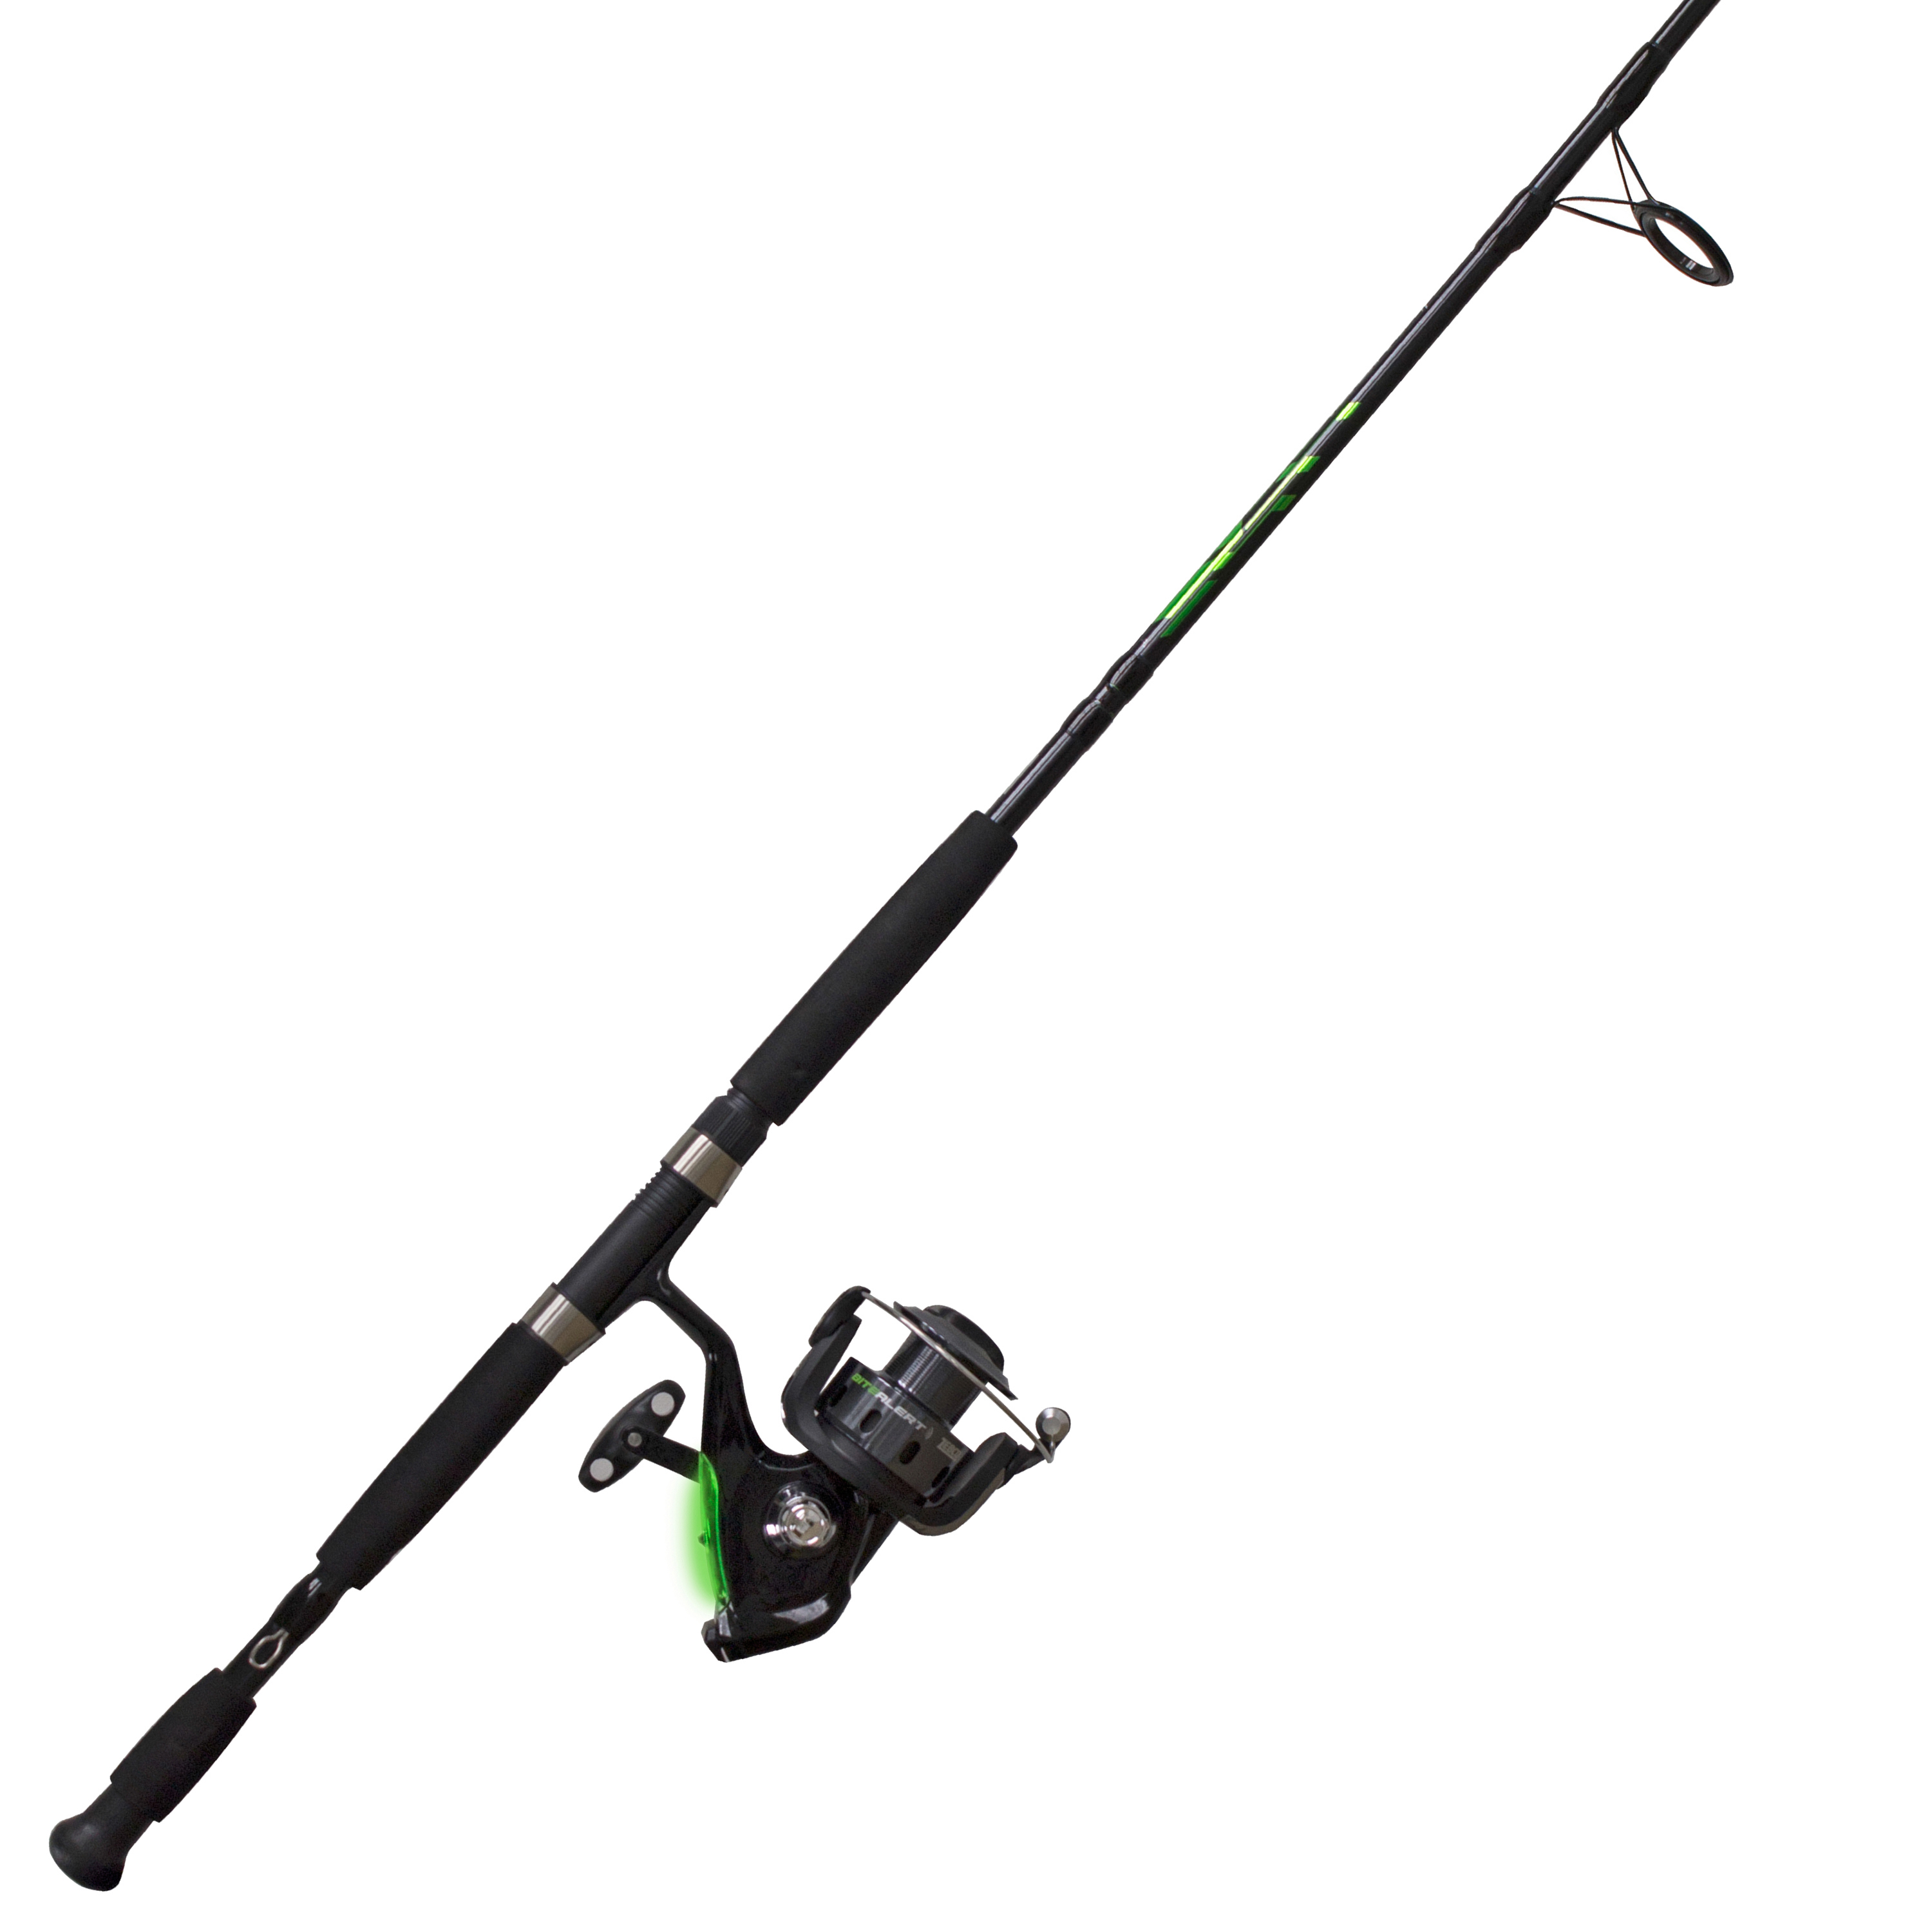 Quickset Anti-Rev... Zebco 33 Micro Spincast Reel and 2-Piece Fishing Rod Combo 